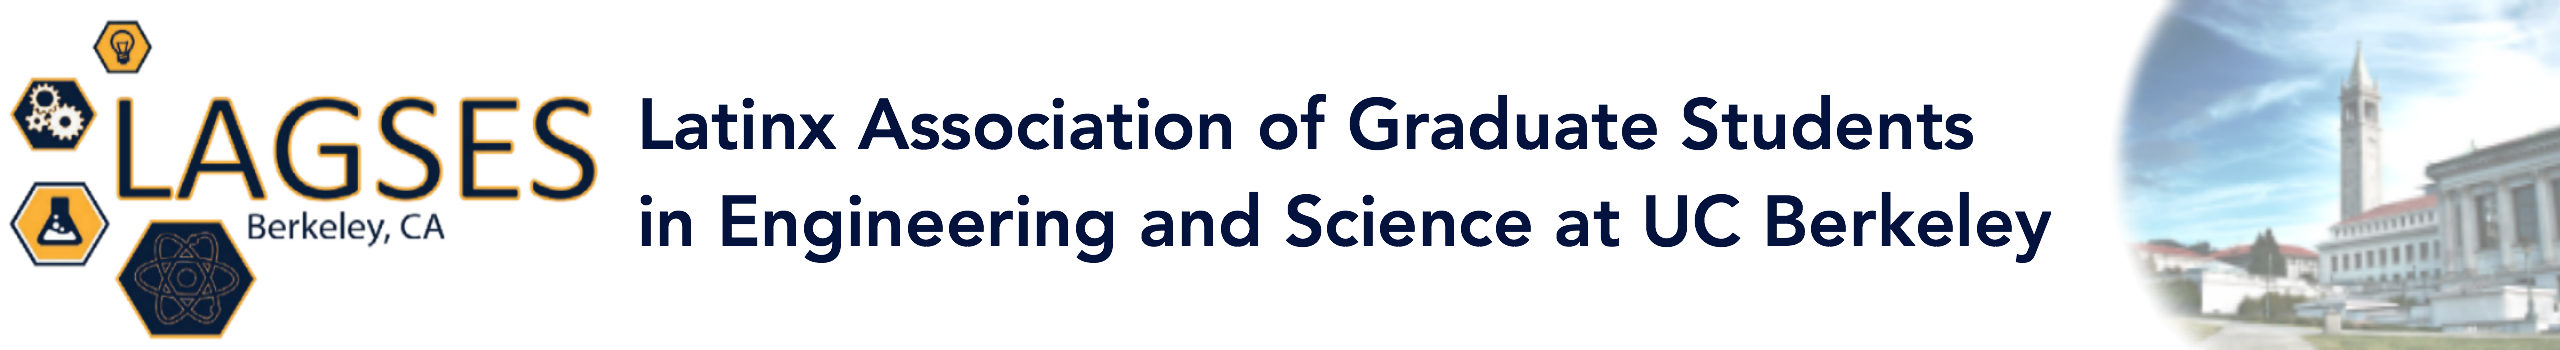 Latinx Association of Graduate Students in Engineering and Science (LAGSES) at UC Berkeley  logo